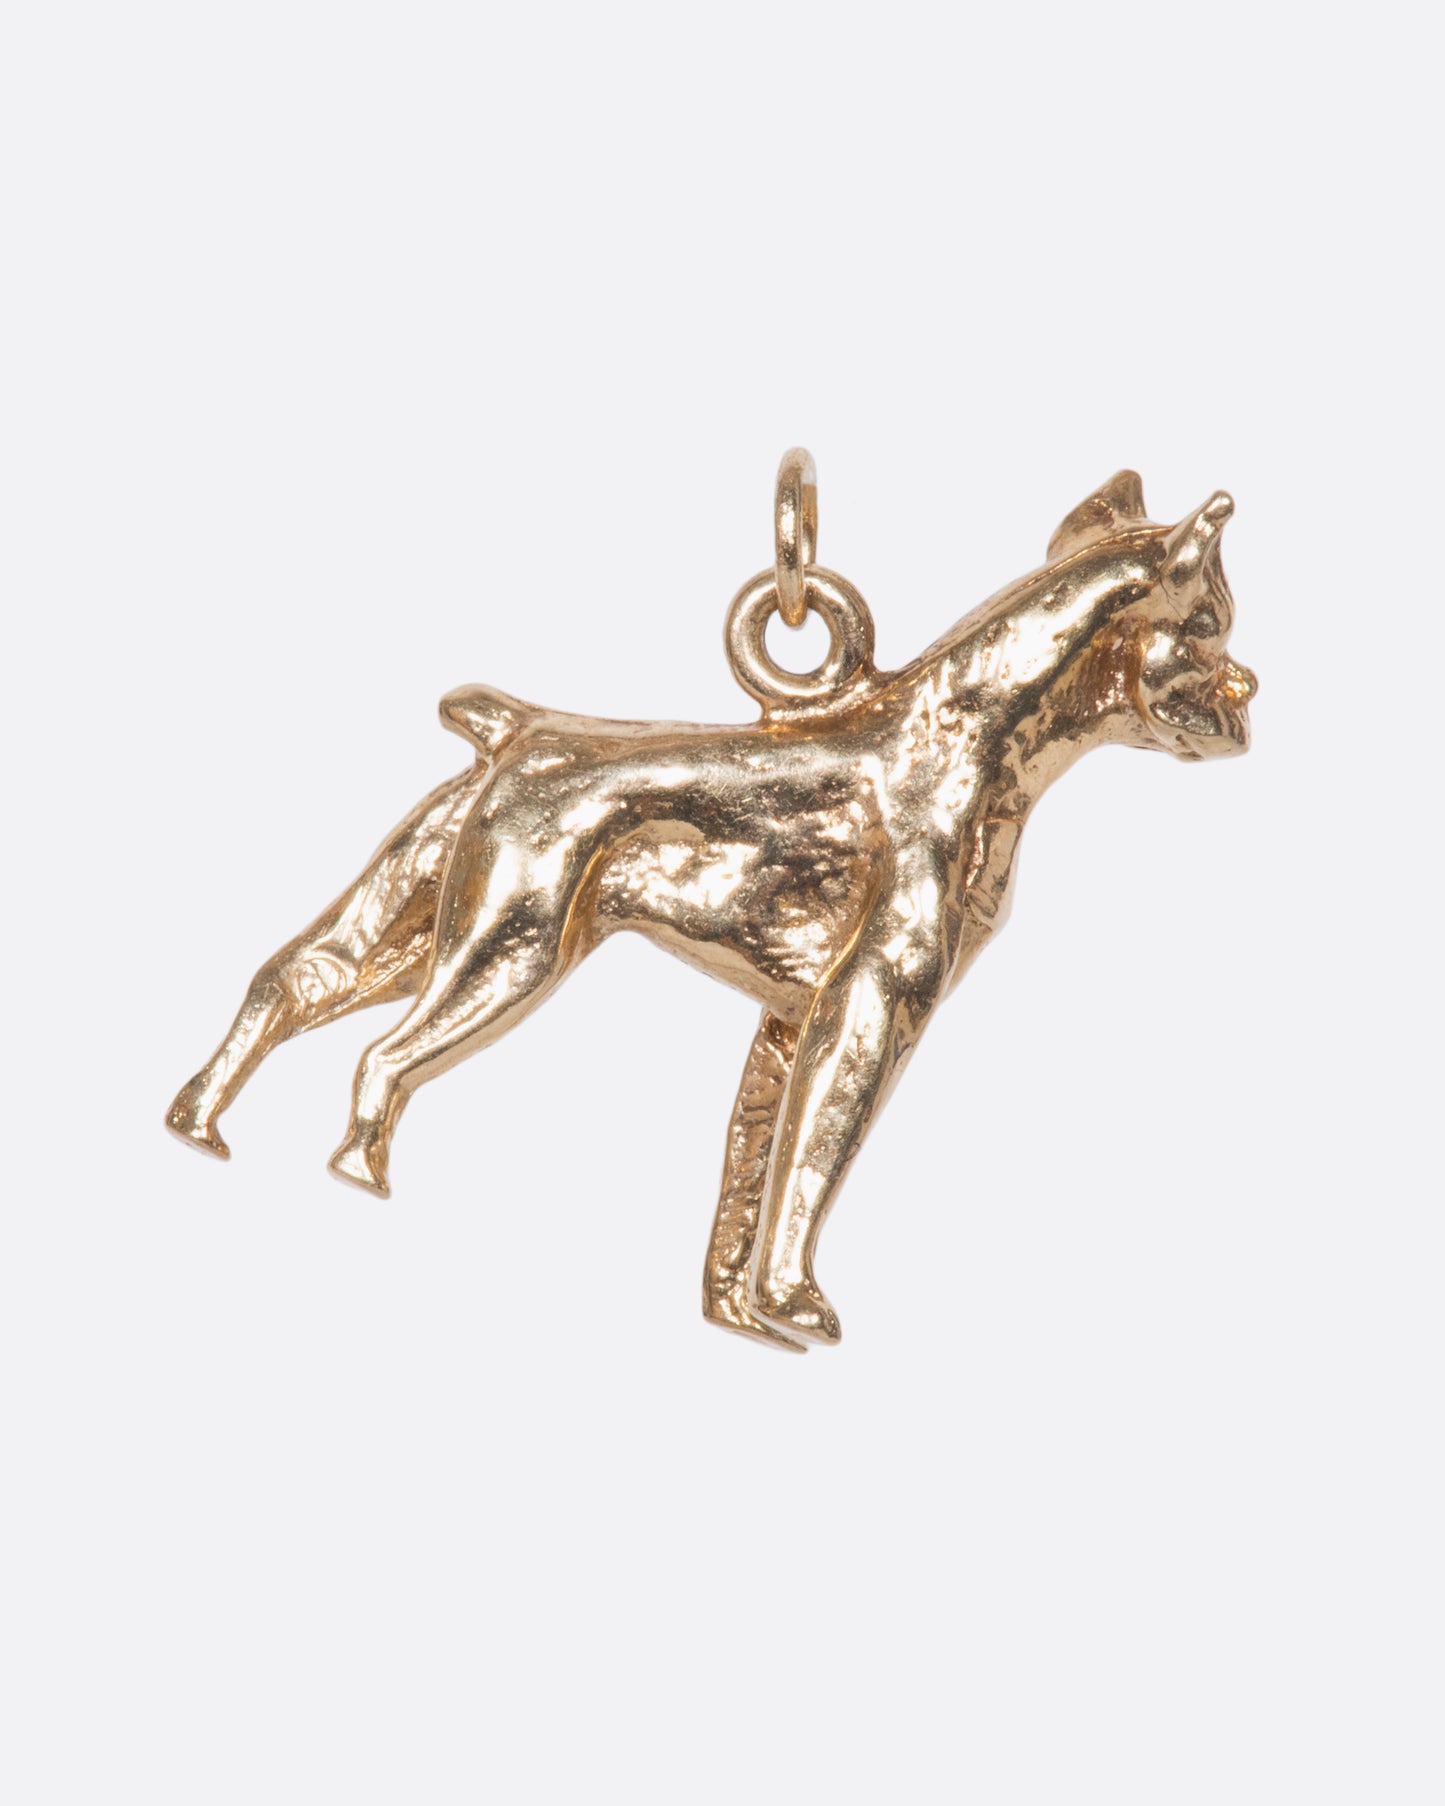 A vintage yellow gold boxer carved with life-like detail. It's unique on each side and stands on its own